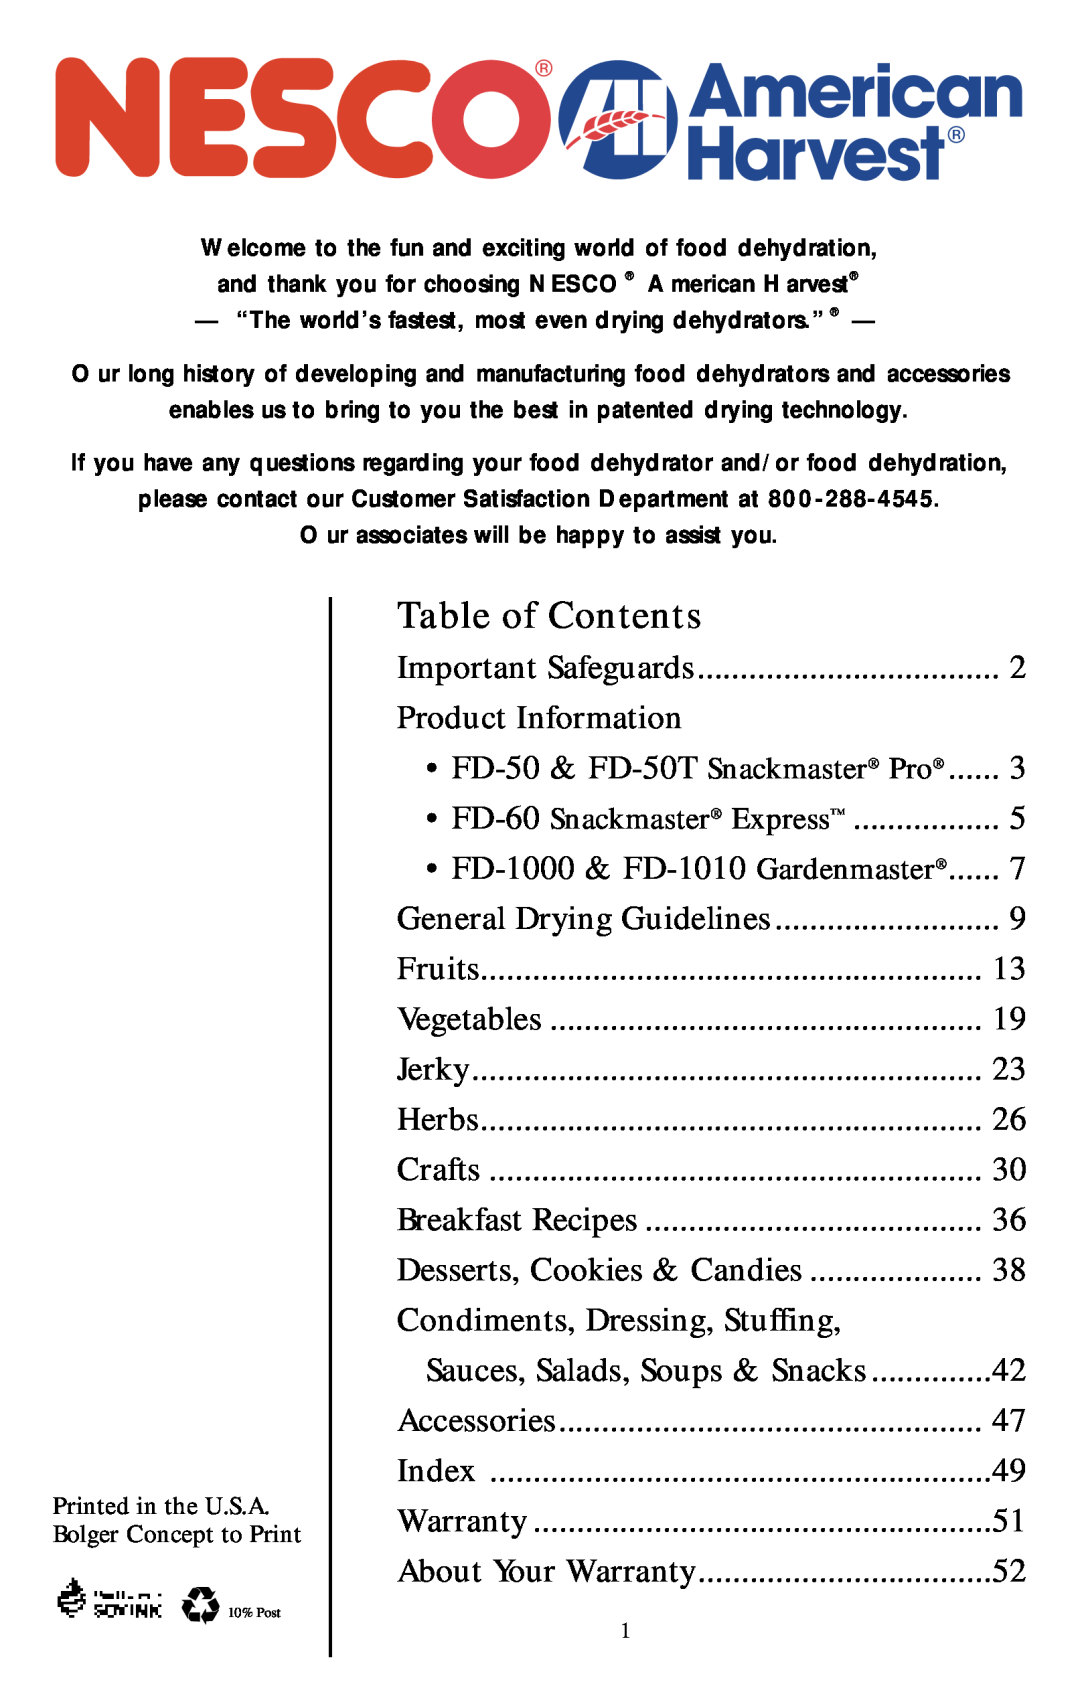 Nesco Food Dehydrator manual Table of Contents, “The world’s fastest, most even drying dehydrators.” 